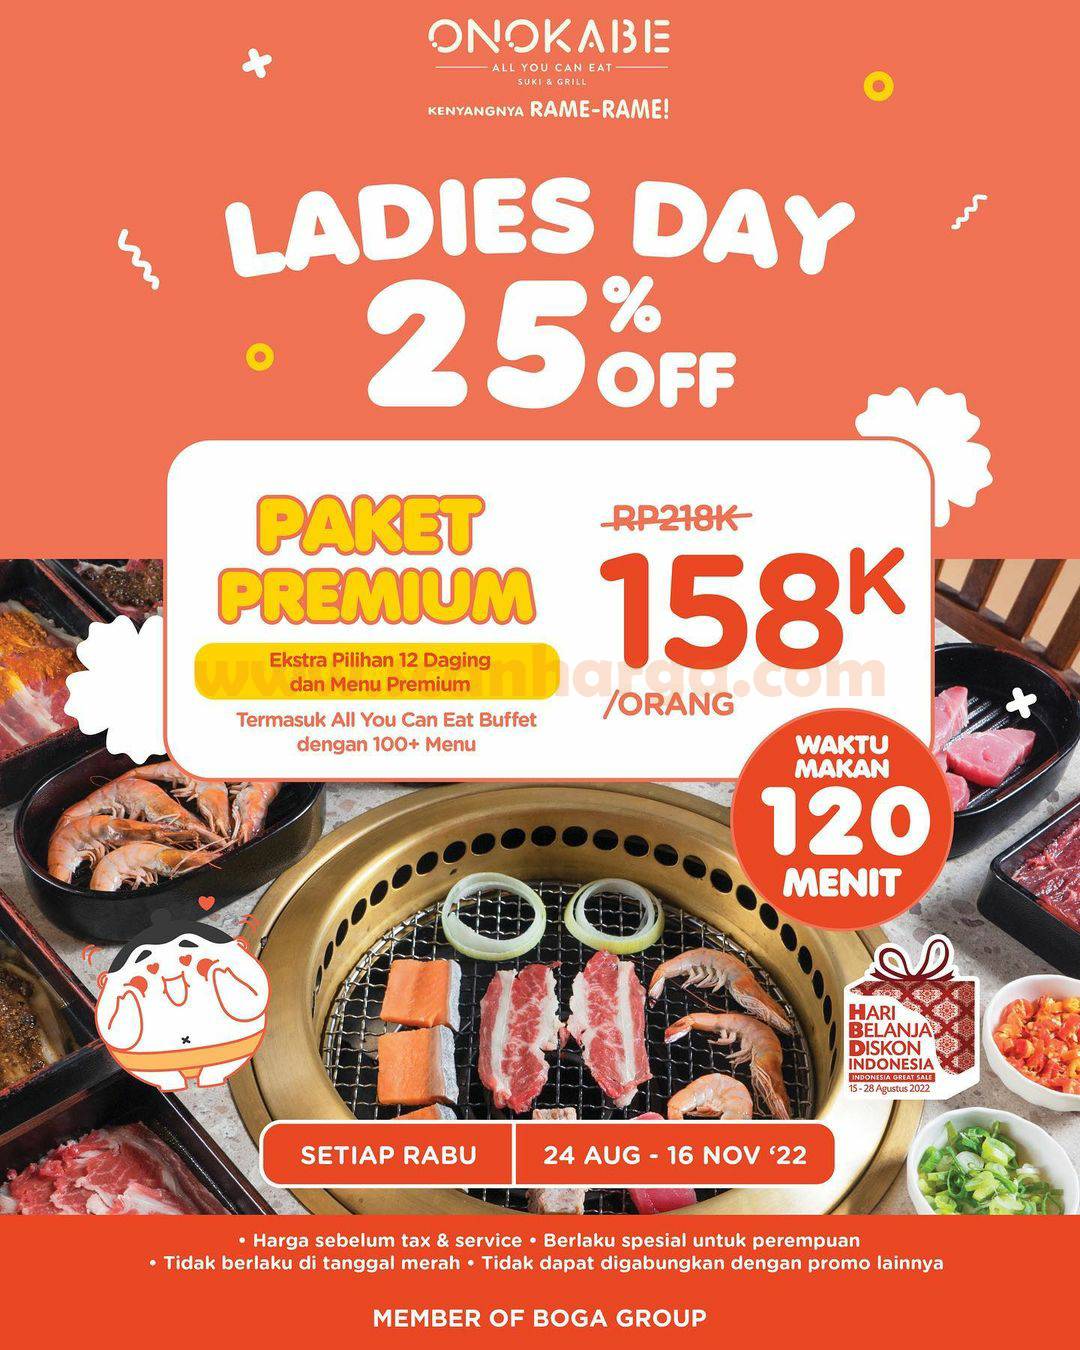 Onokabe Promo Ladies Day Discount up to 25% Off